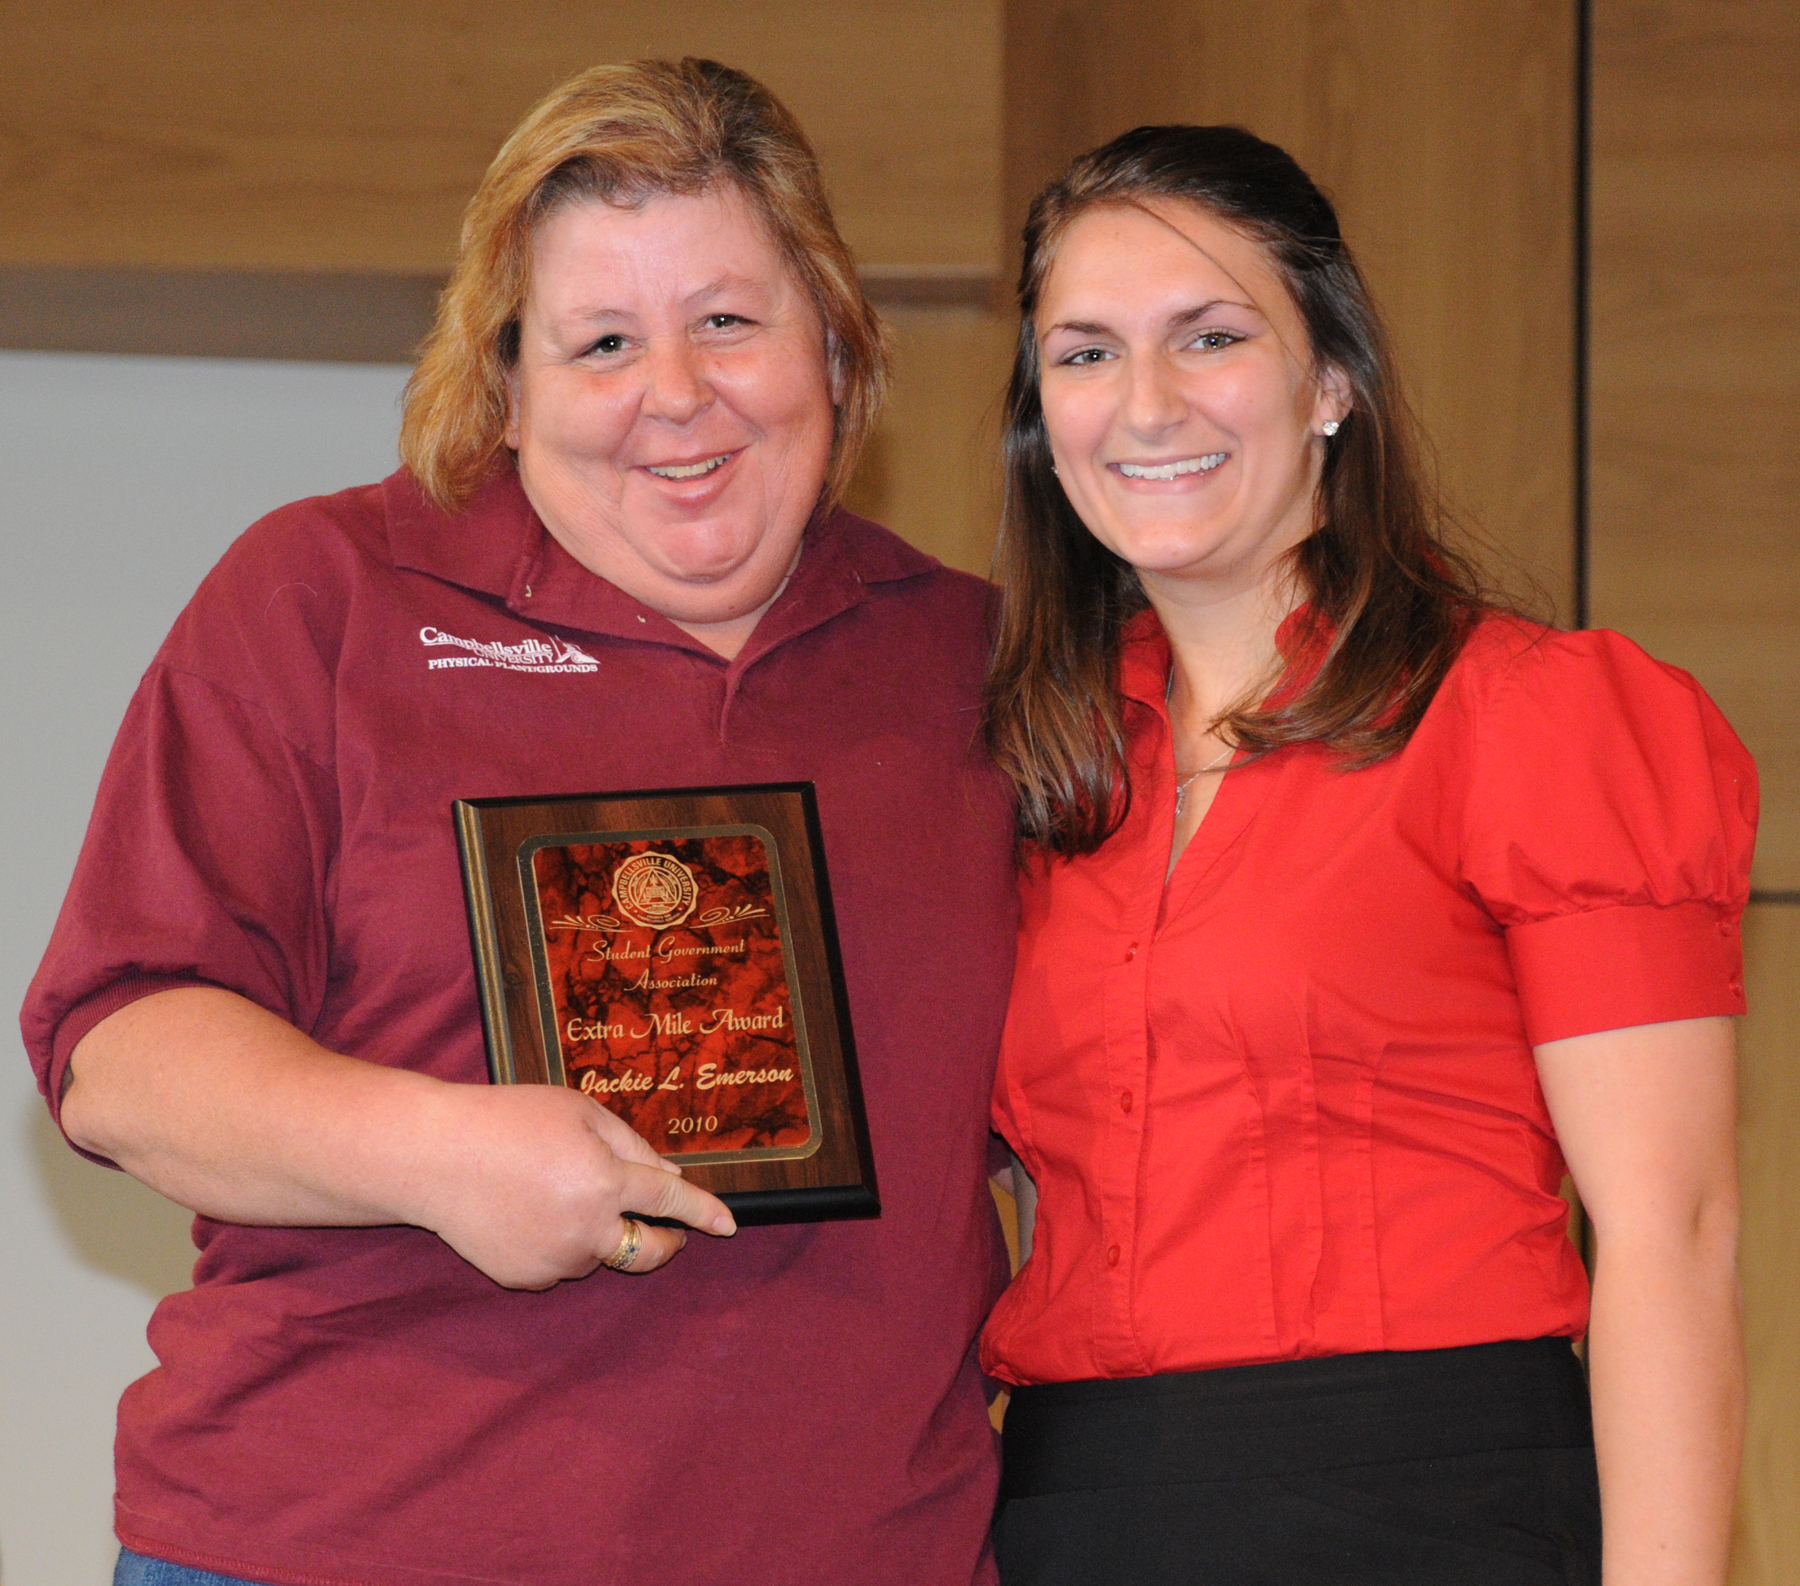 Jackie Emerson, custodian, receives the SGA Extra Mile Award for faculty/staff from Christina Miller, SGA president. (CU Photo by Ashley Zsedenyi)